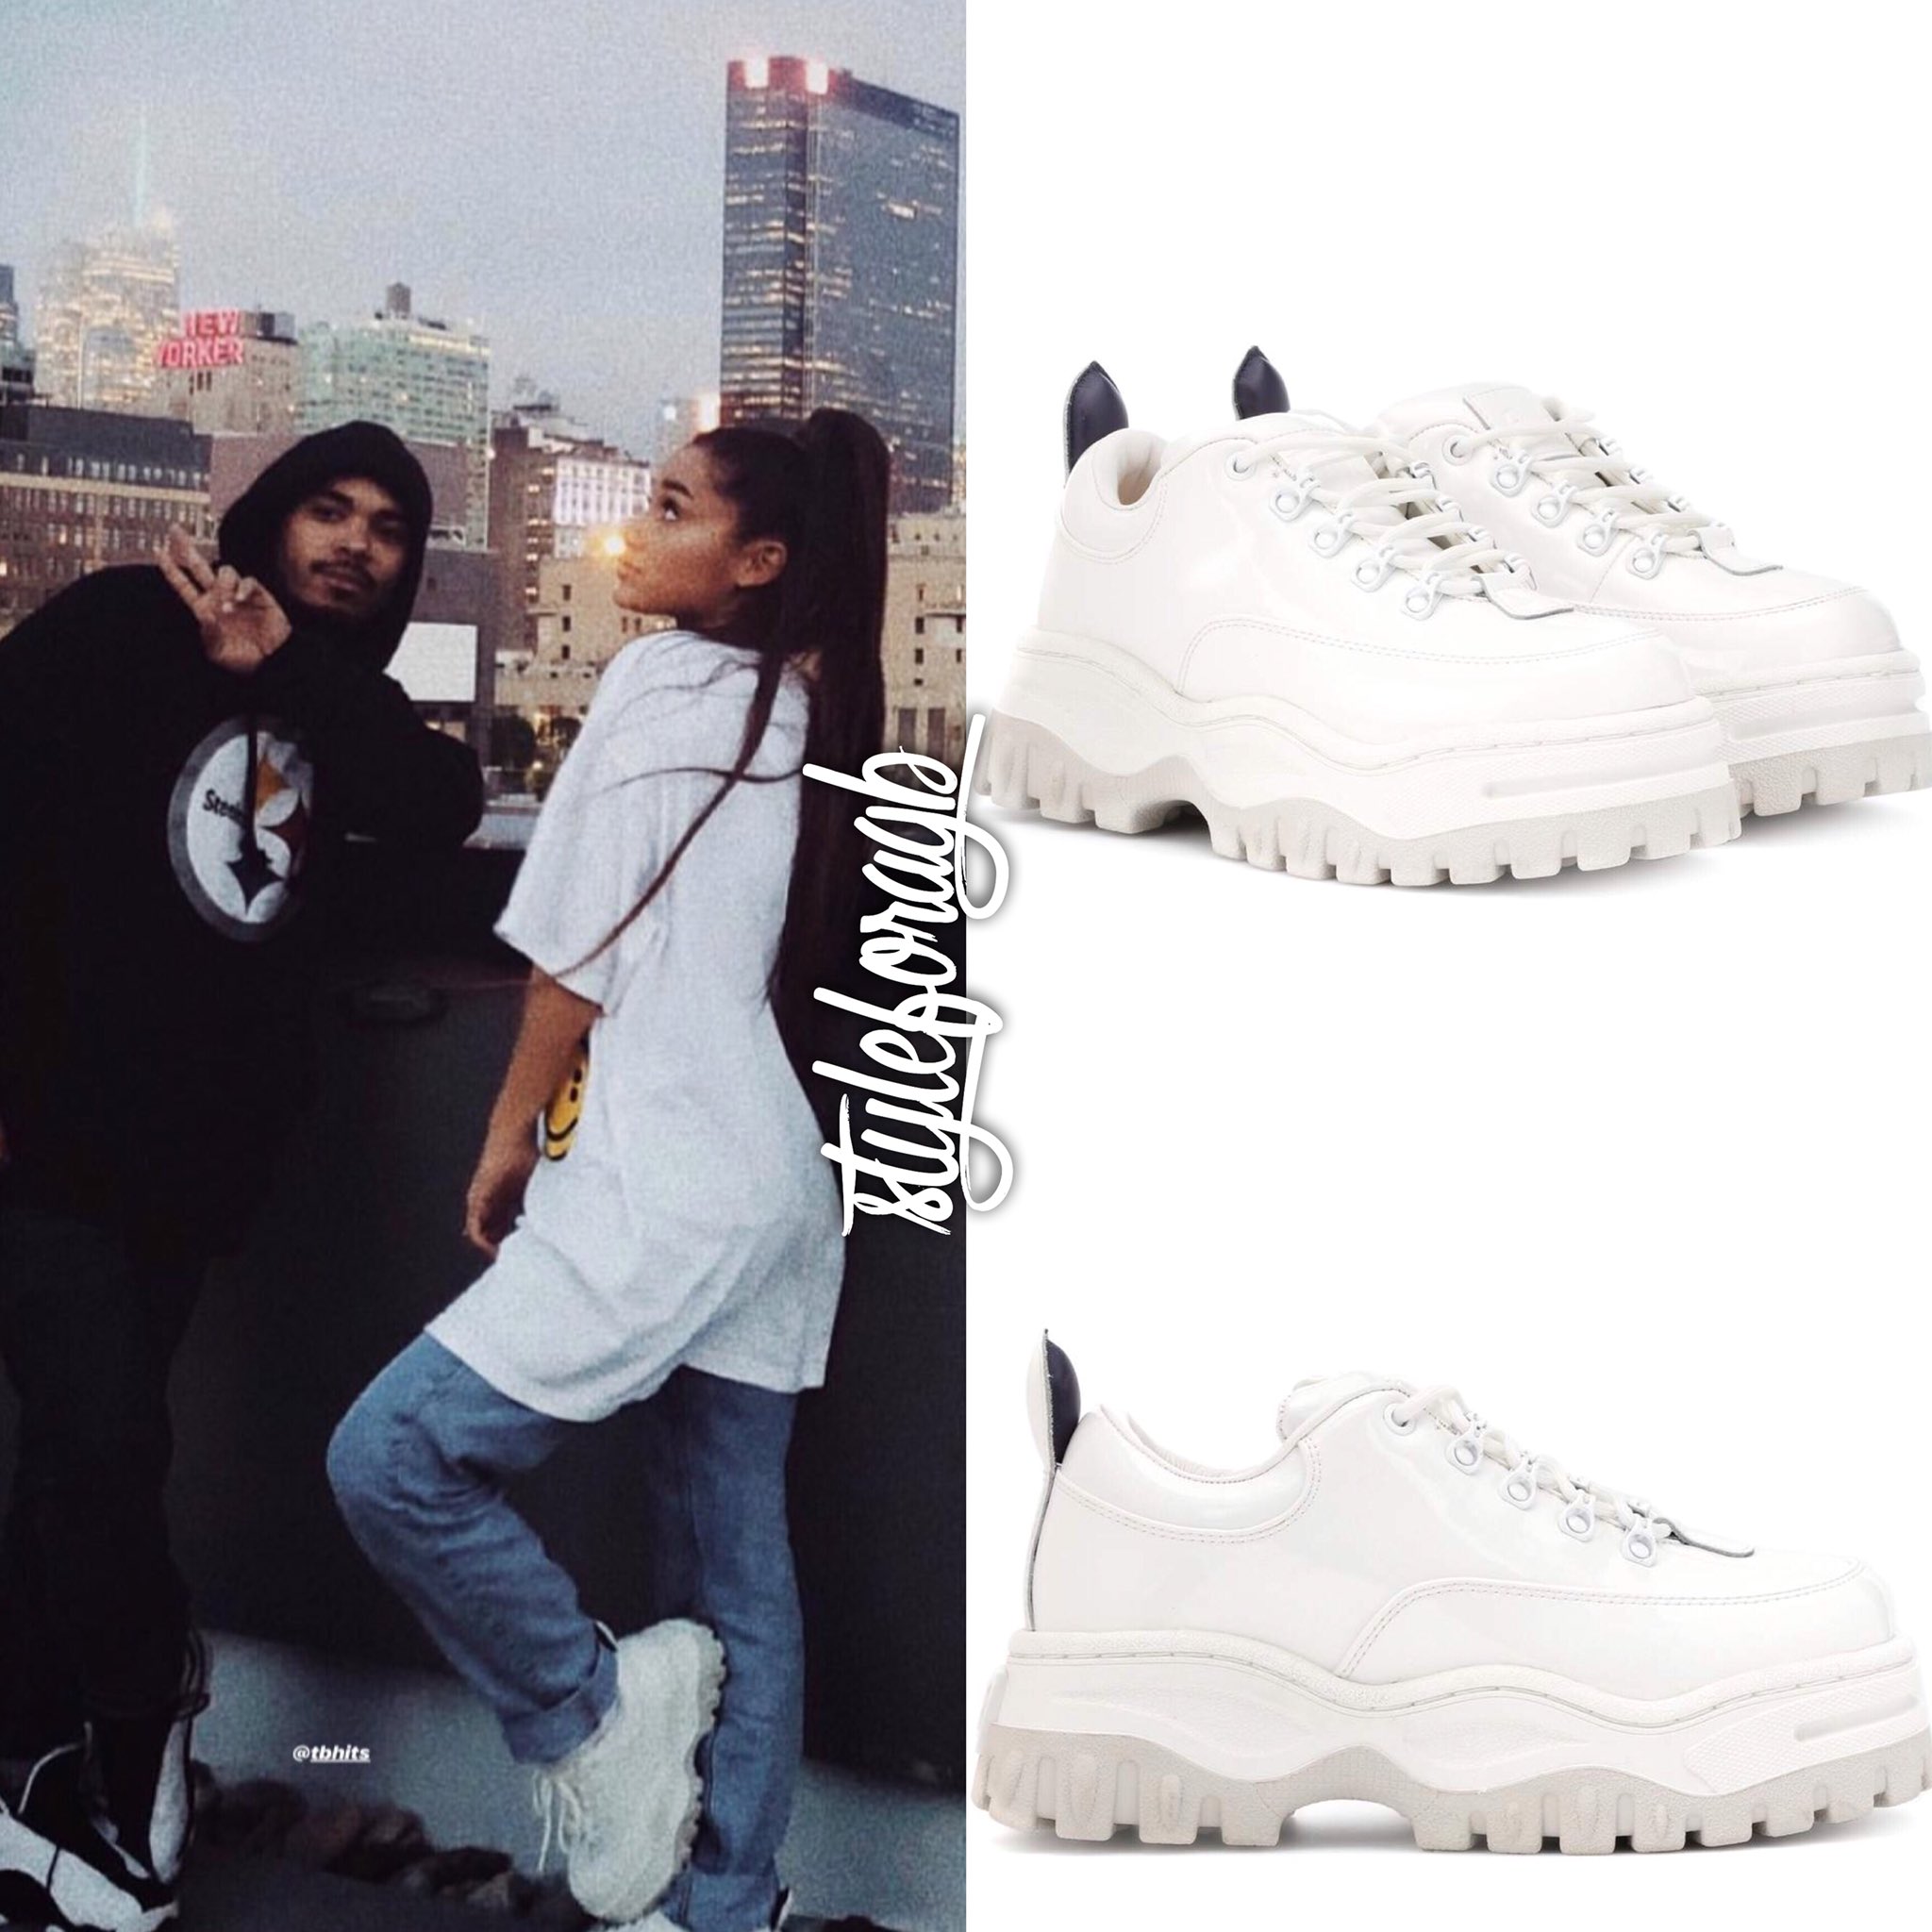 Ariana Grande's closet on Twitter: "Ariana via Instagram stories October 10th, 2018. - Wearing the Eytys Angel patent leather sneakers https://t.co/FH8ZPfKFO5" / Twitter